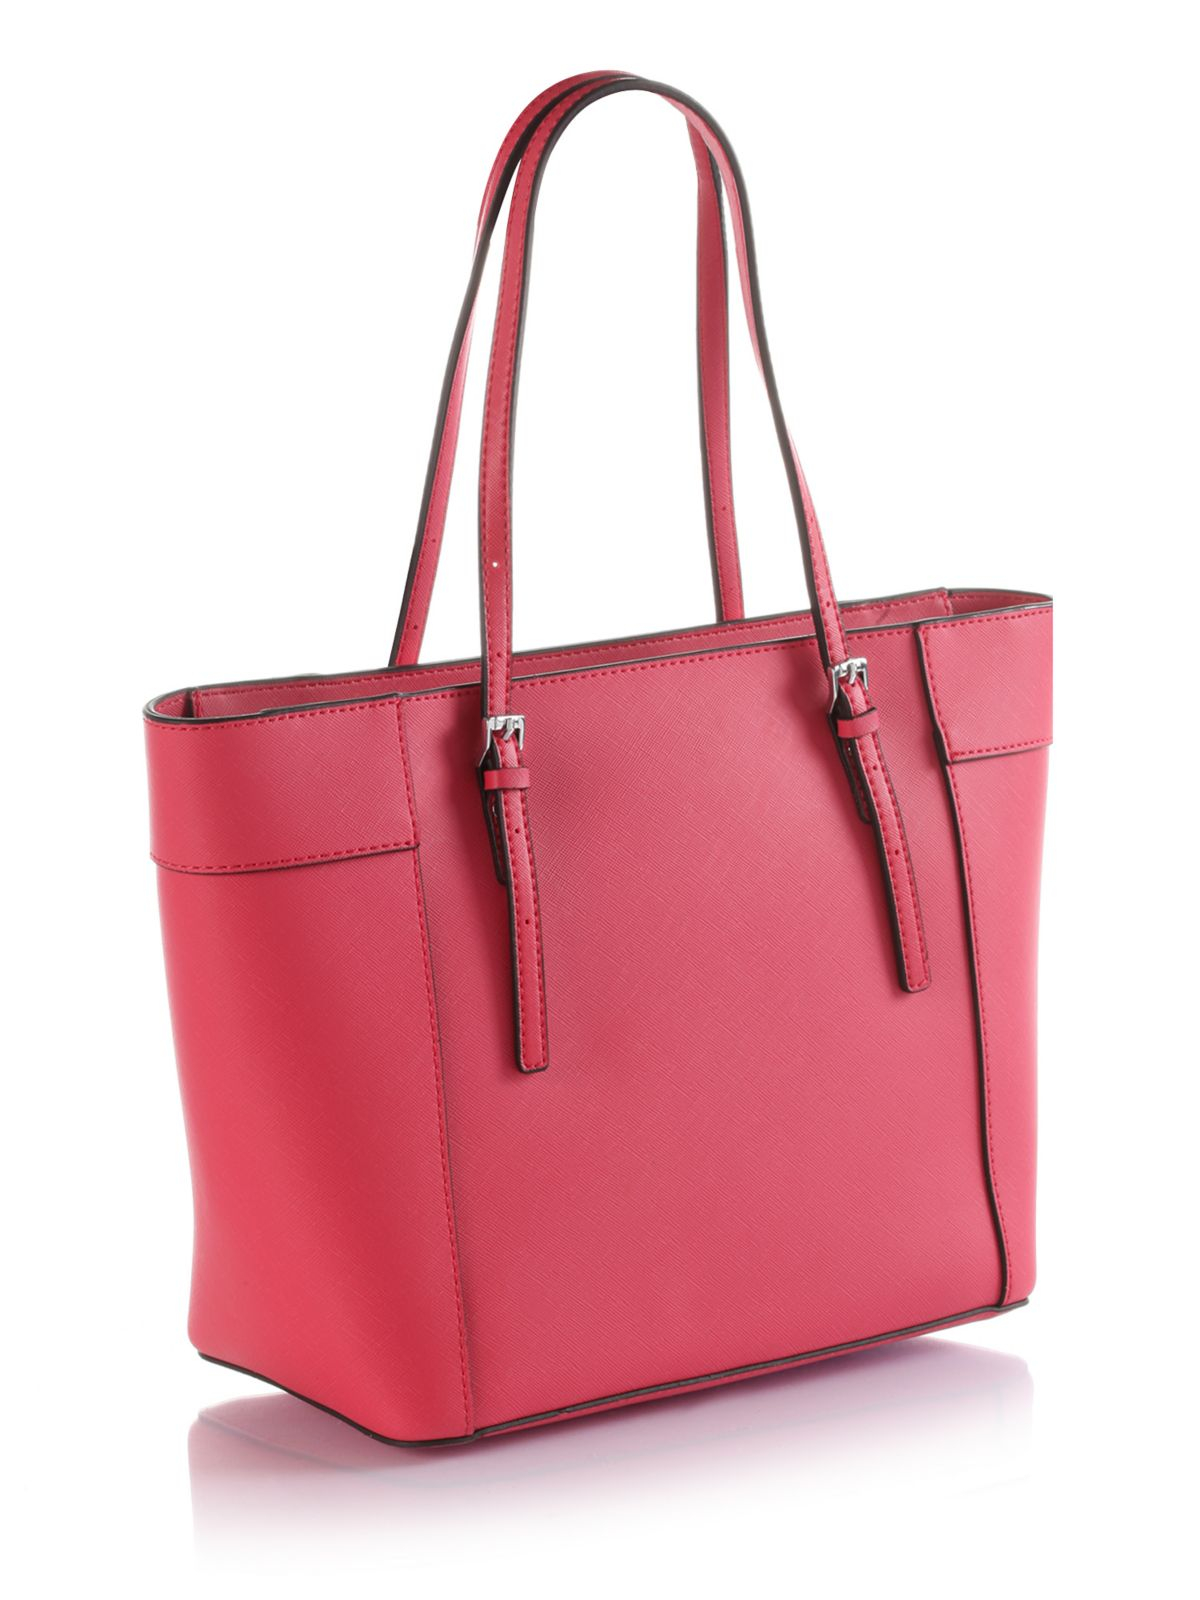 Guess Delaney Small Classic Tote Bag in Pink (fuchsia) | Lyst